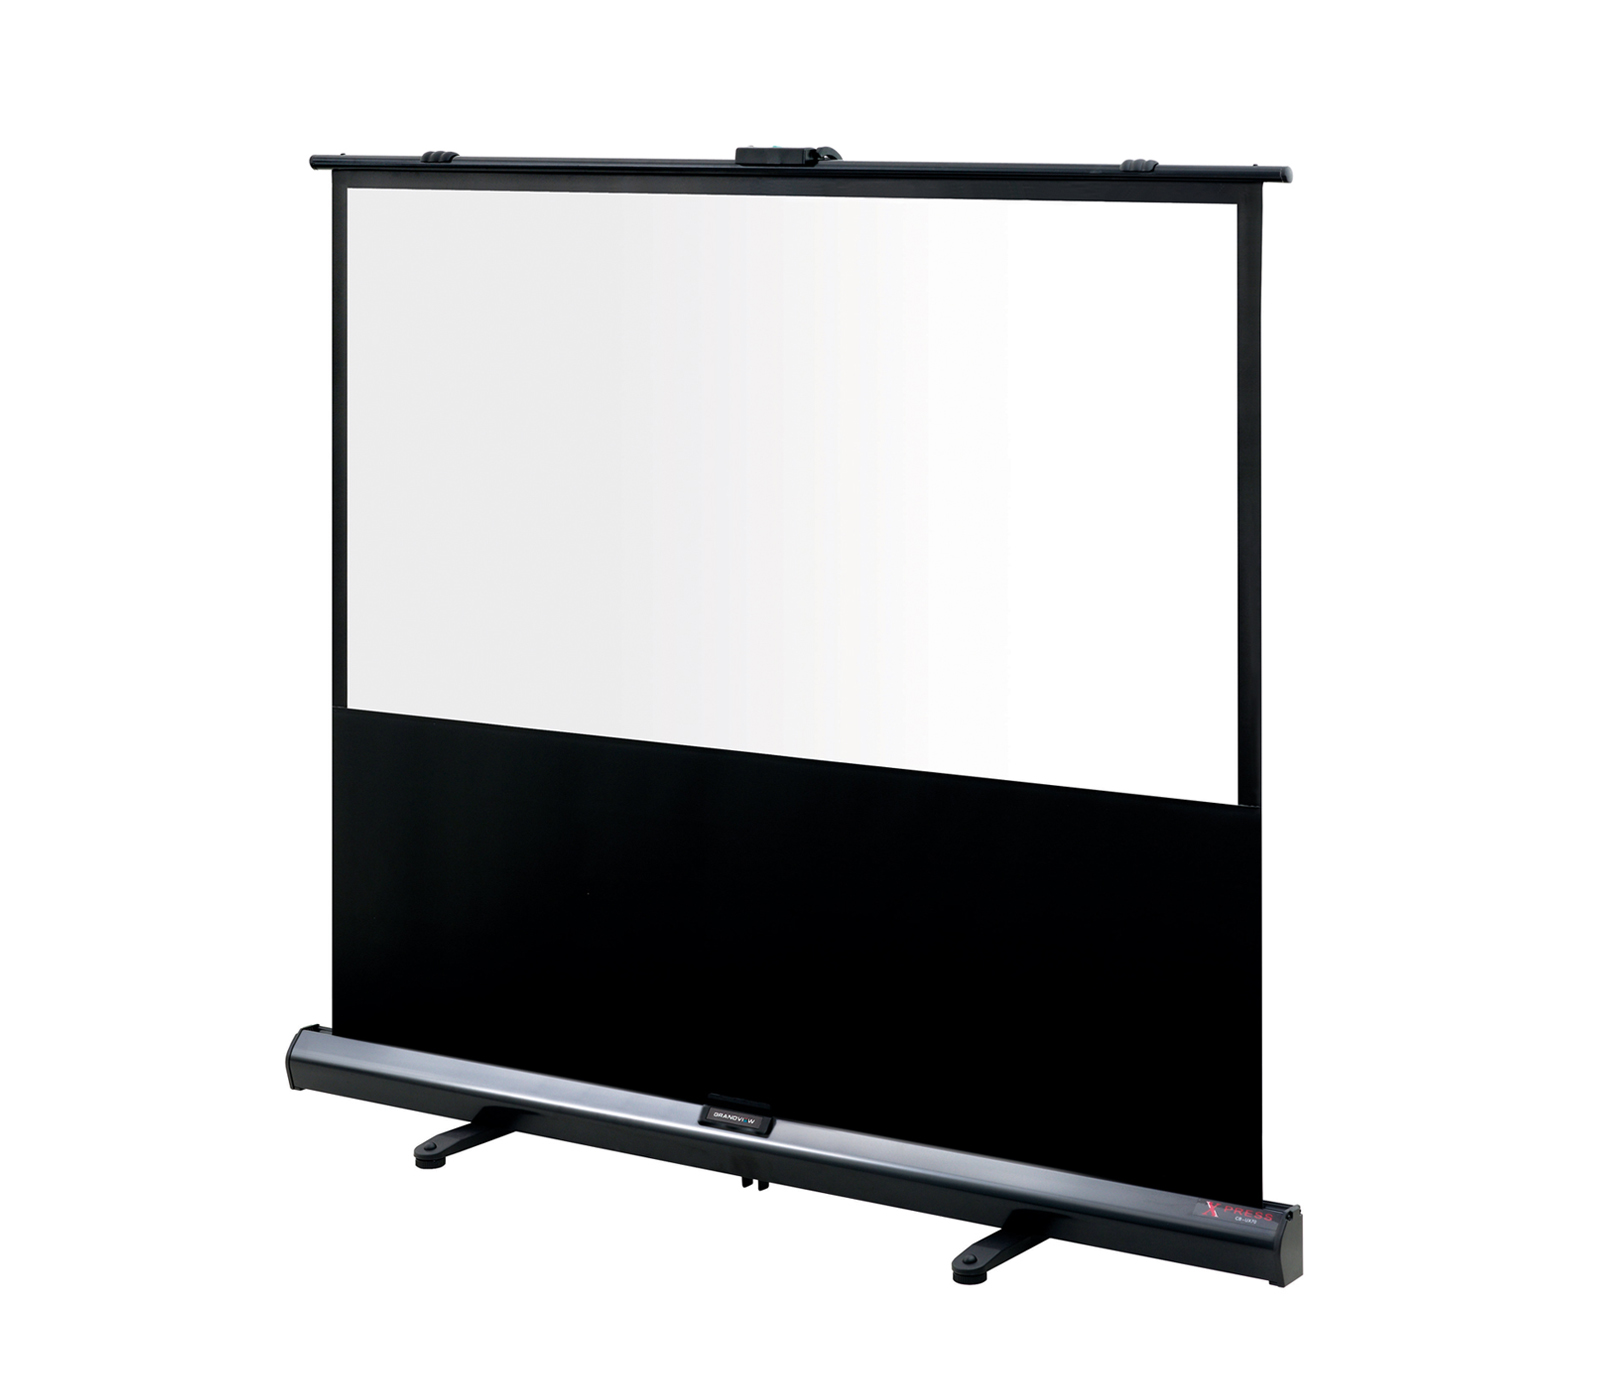 Portable Series X/Y-Press Pull-Up Screen